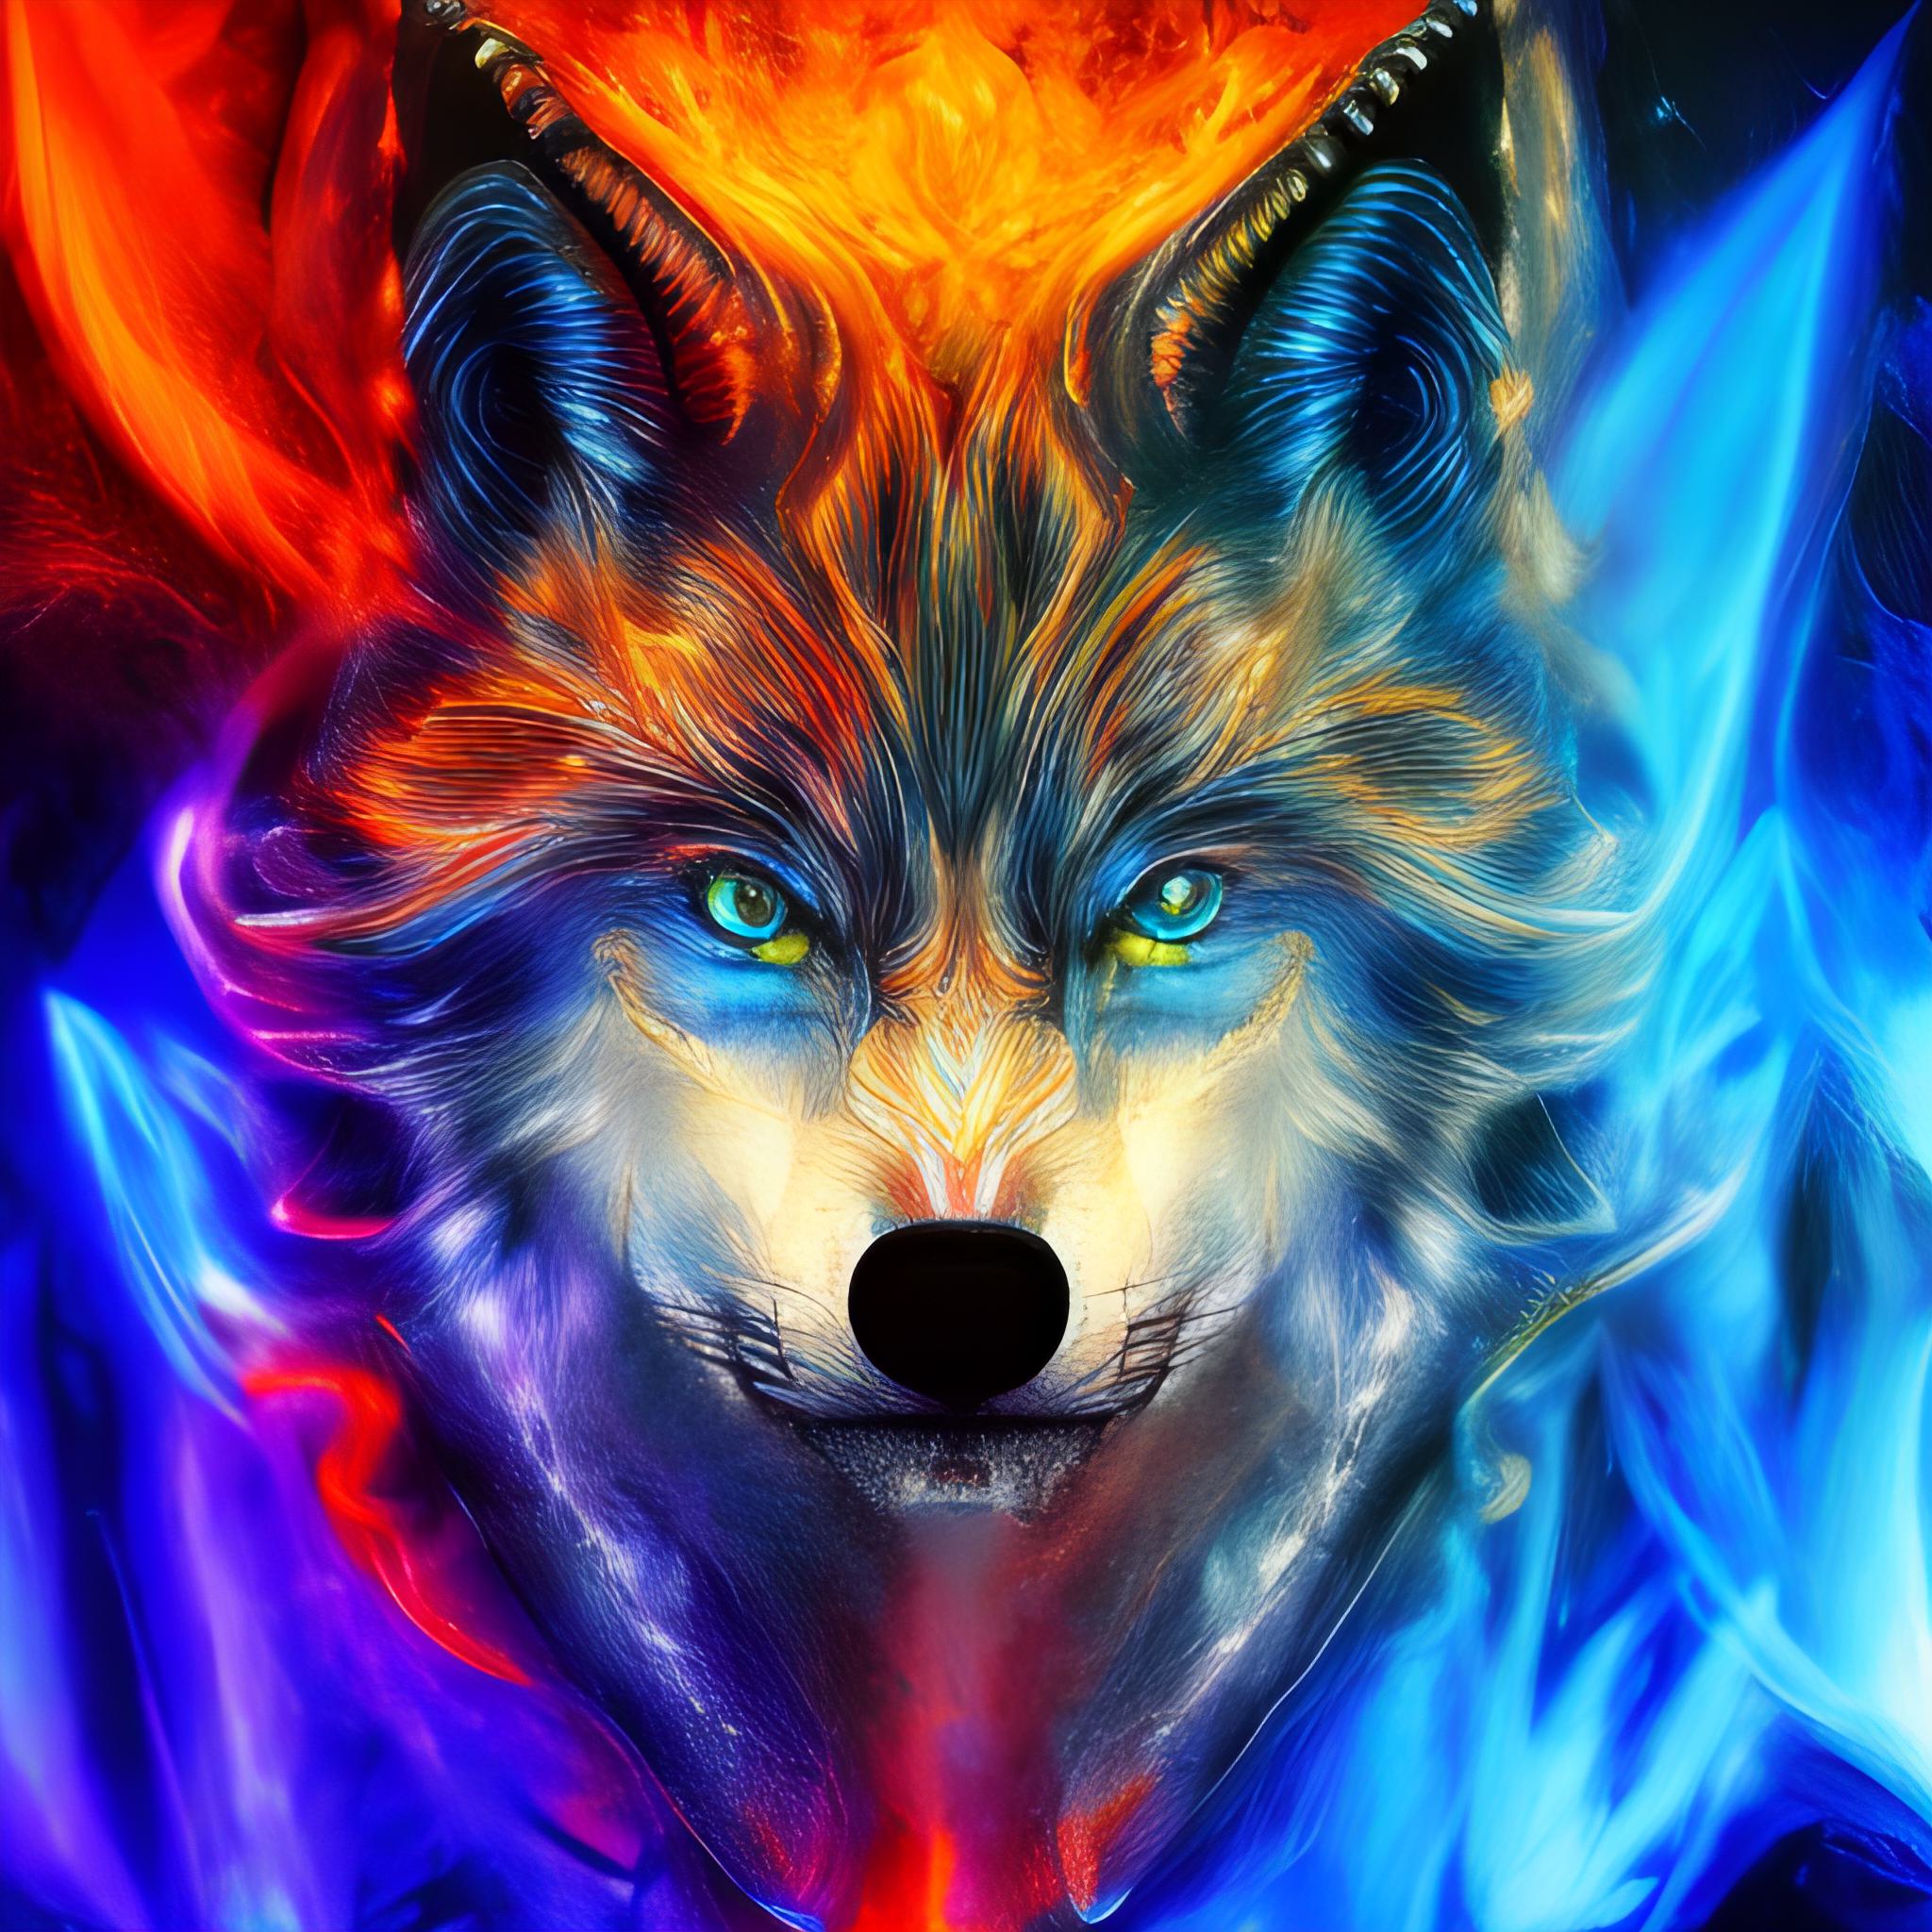 blue flame wolf fire, psychedelic by GiuseppeDiRosso on DeviantArt